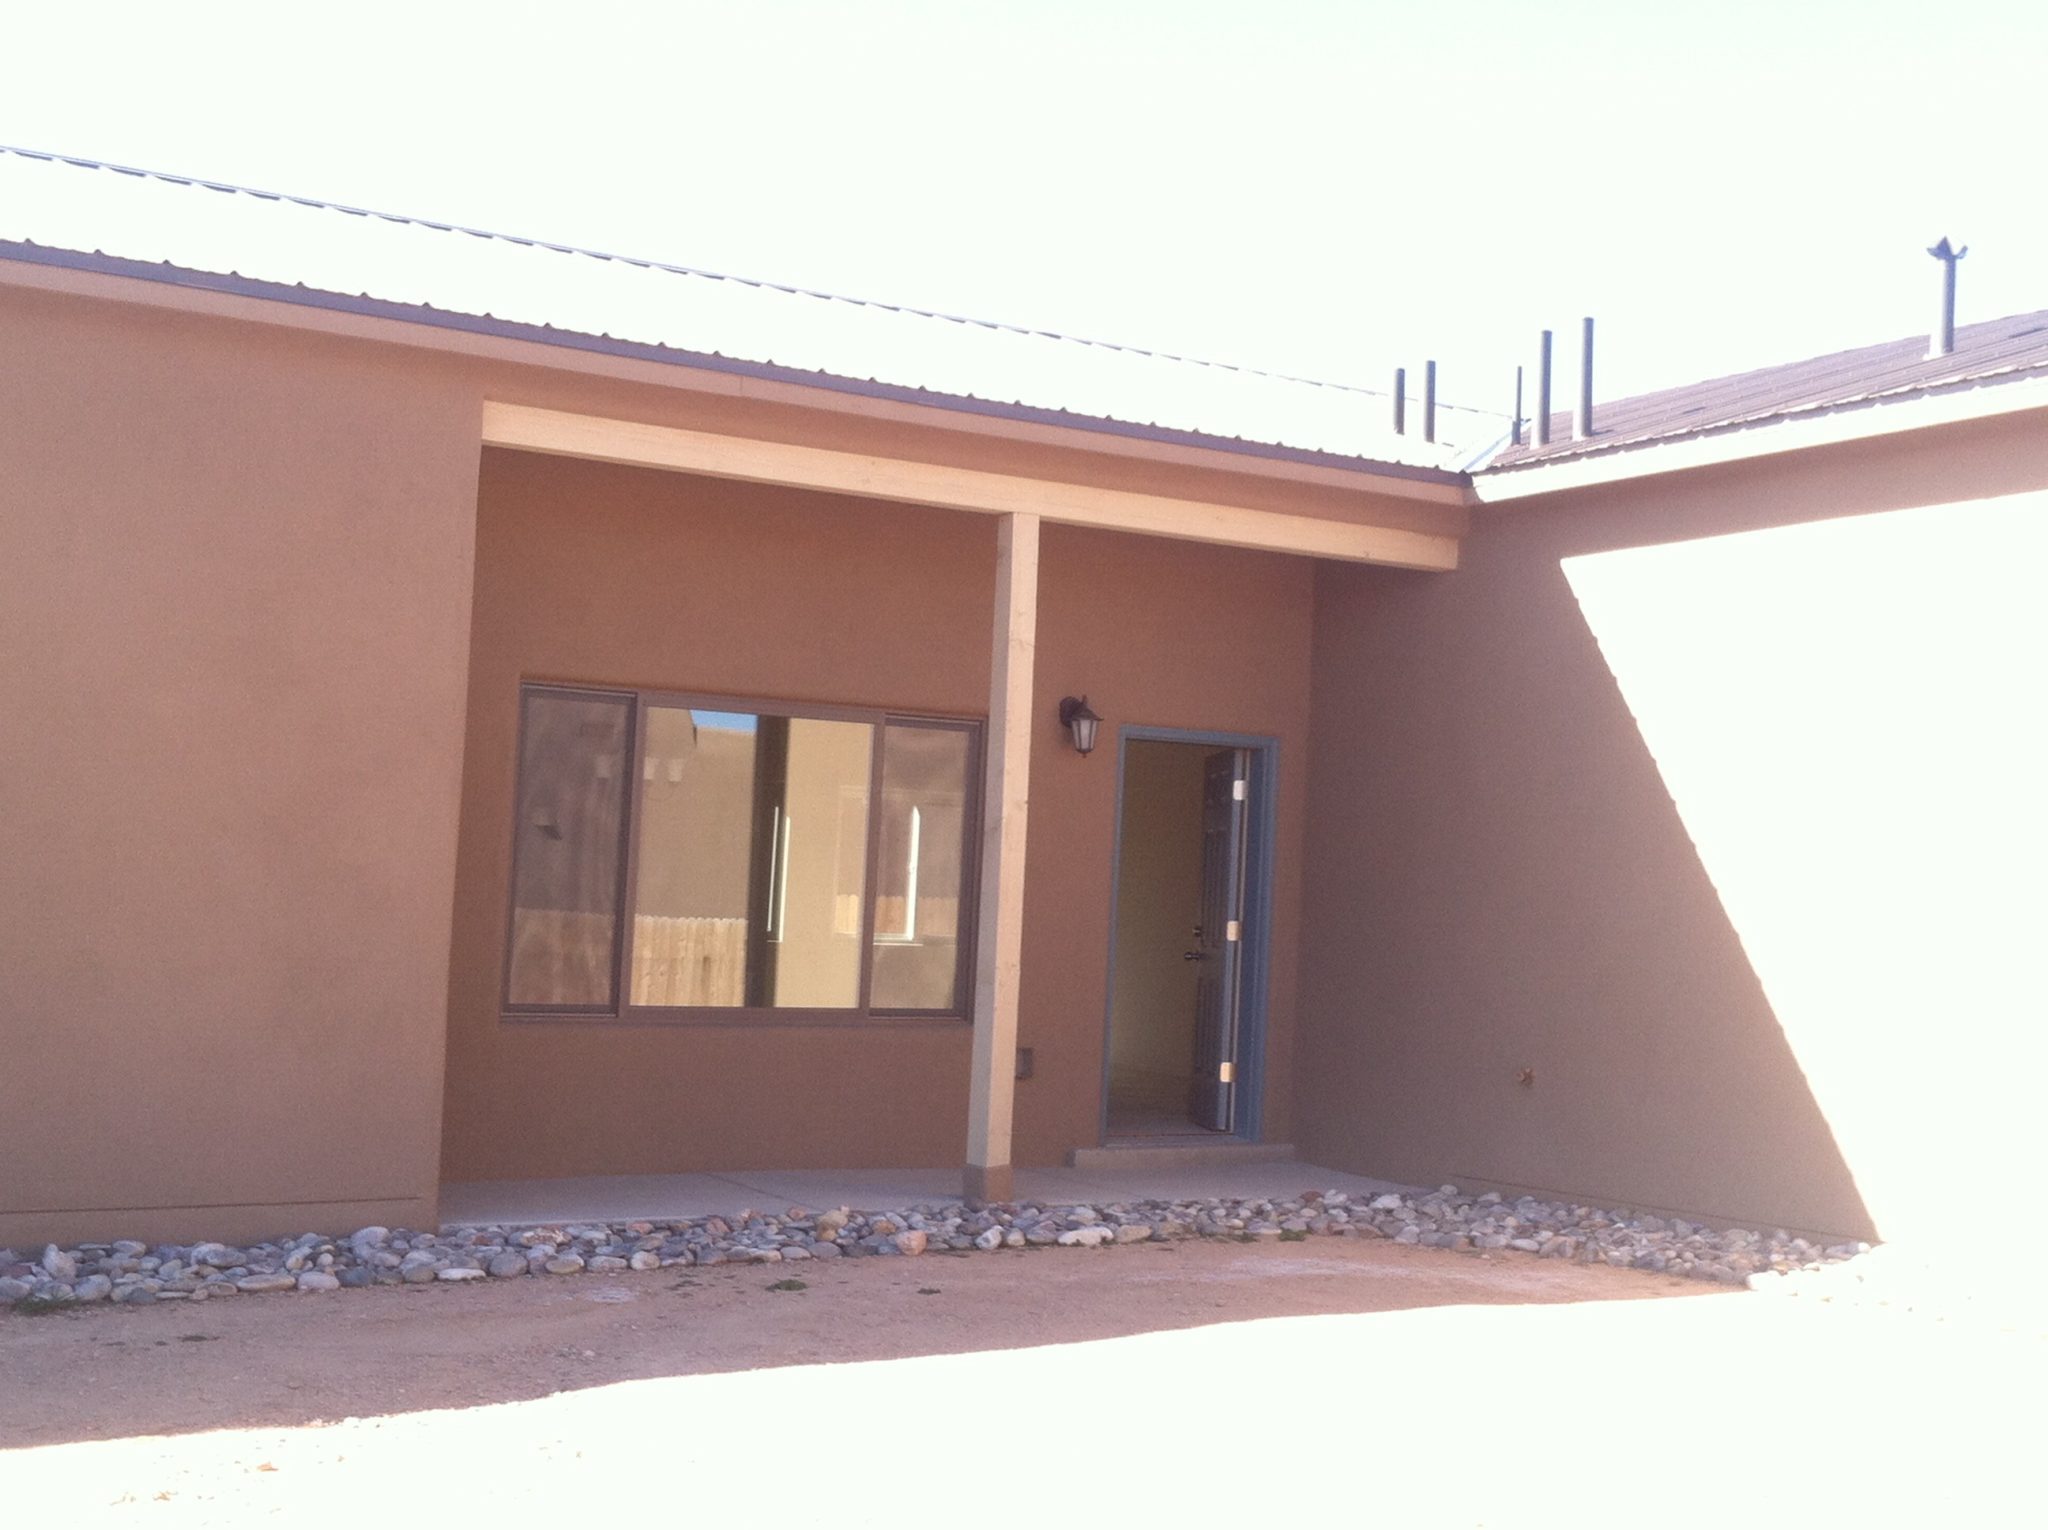 Community Options Purchases First Home in Santa Fe